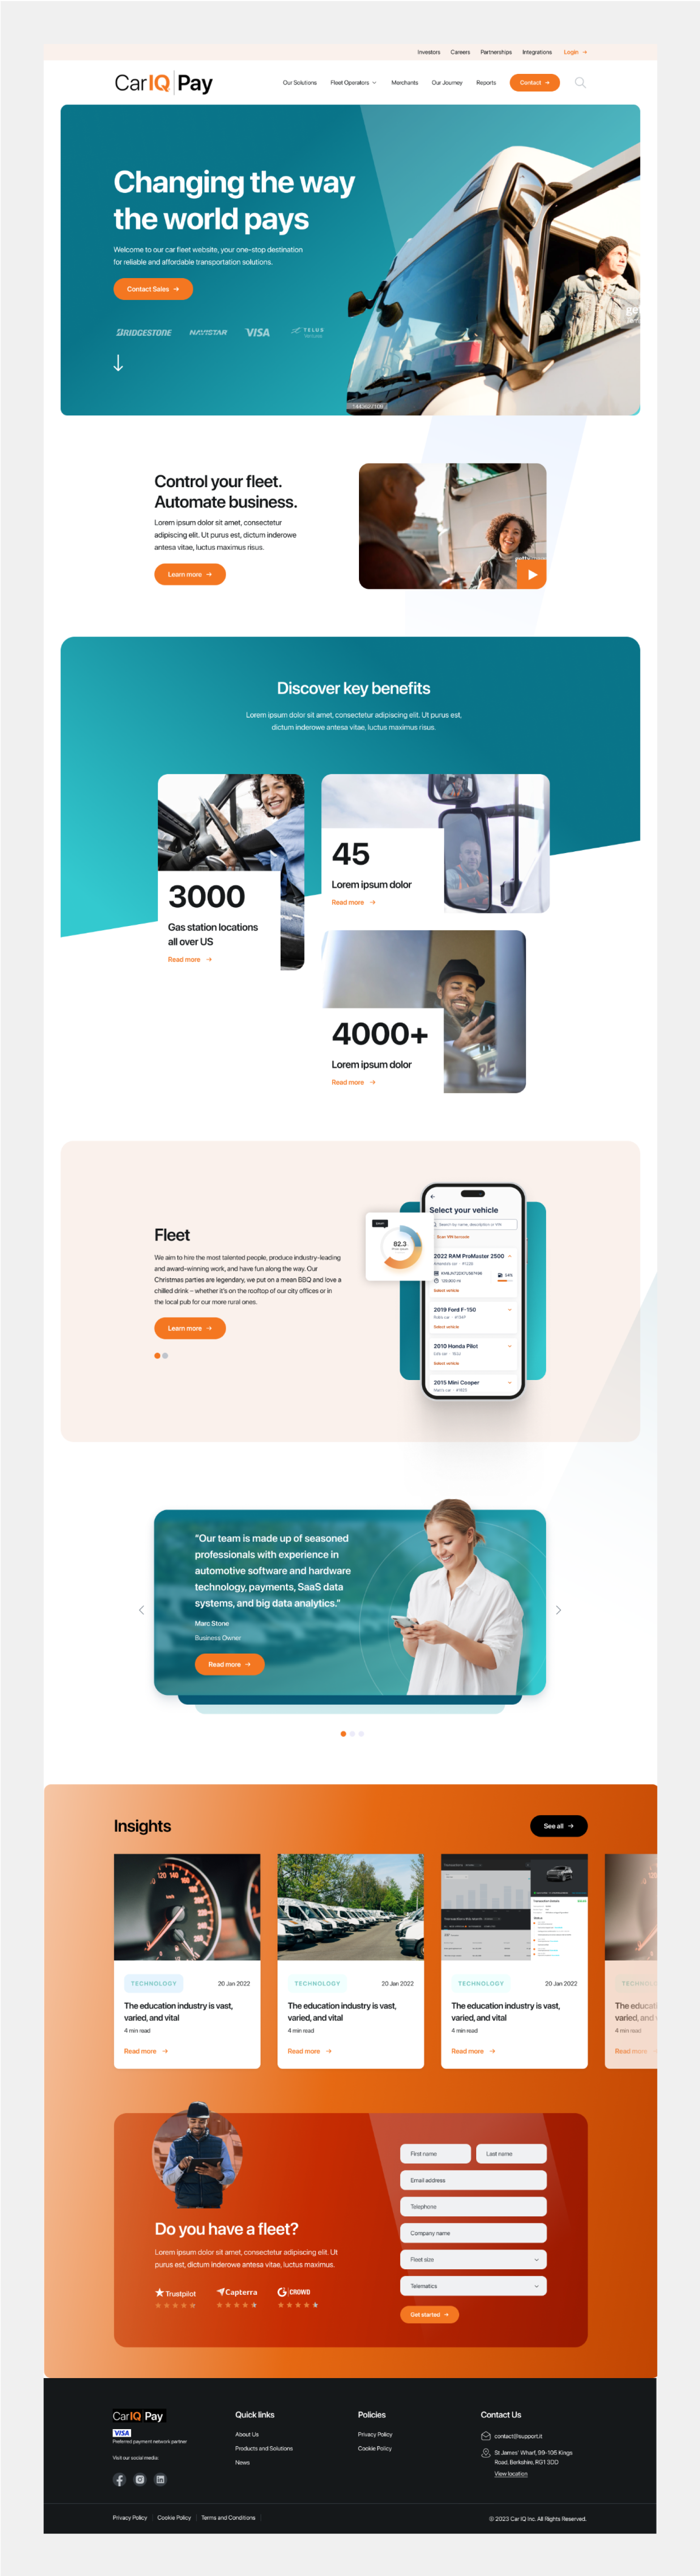 Landing page for Car IQ marketing website.